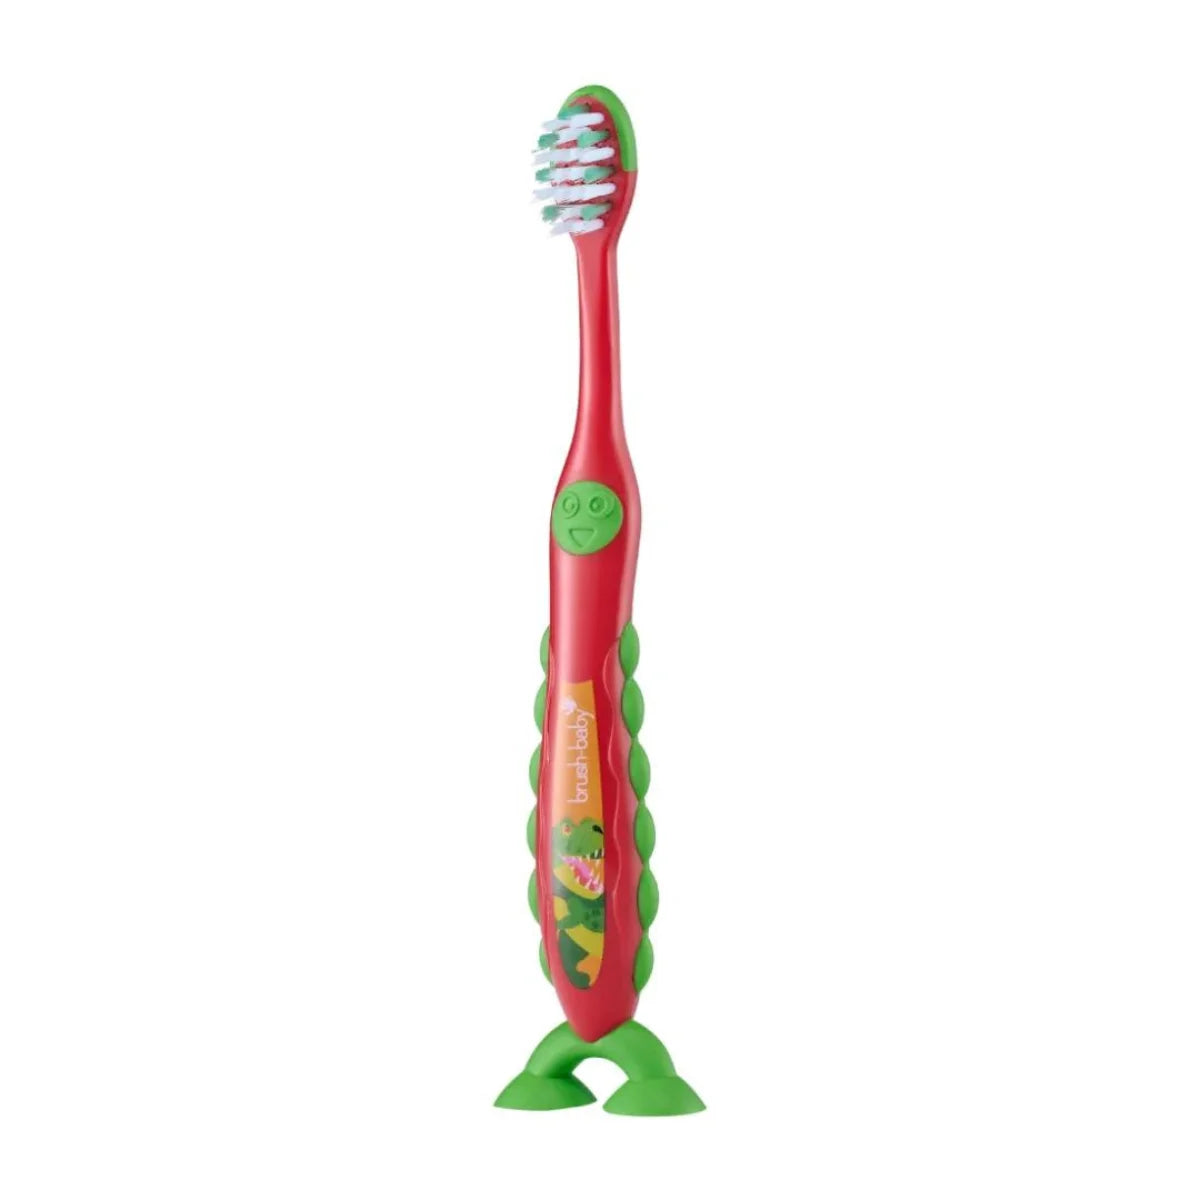 Dex the Dinosaur Deep clean Bristles toothbrush for kids Flossbrush in Red with green sucker feet for children